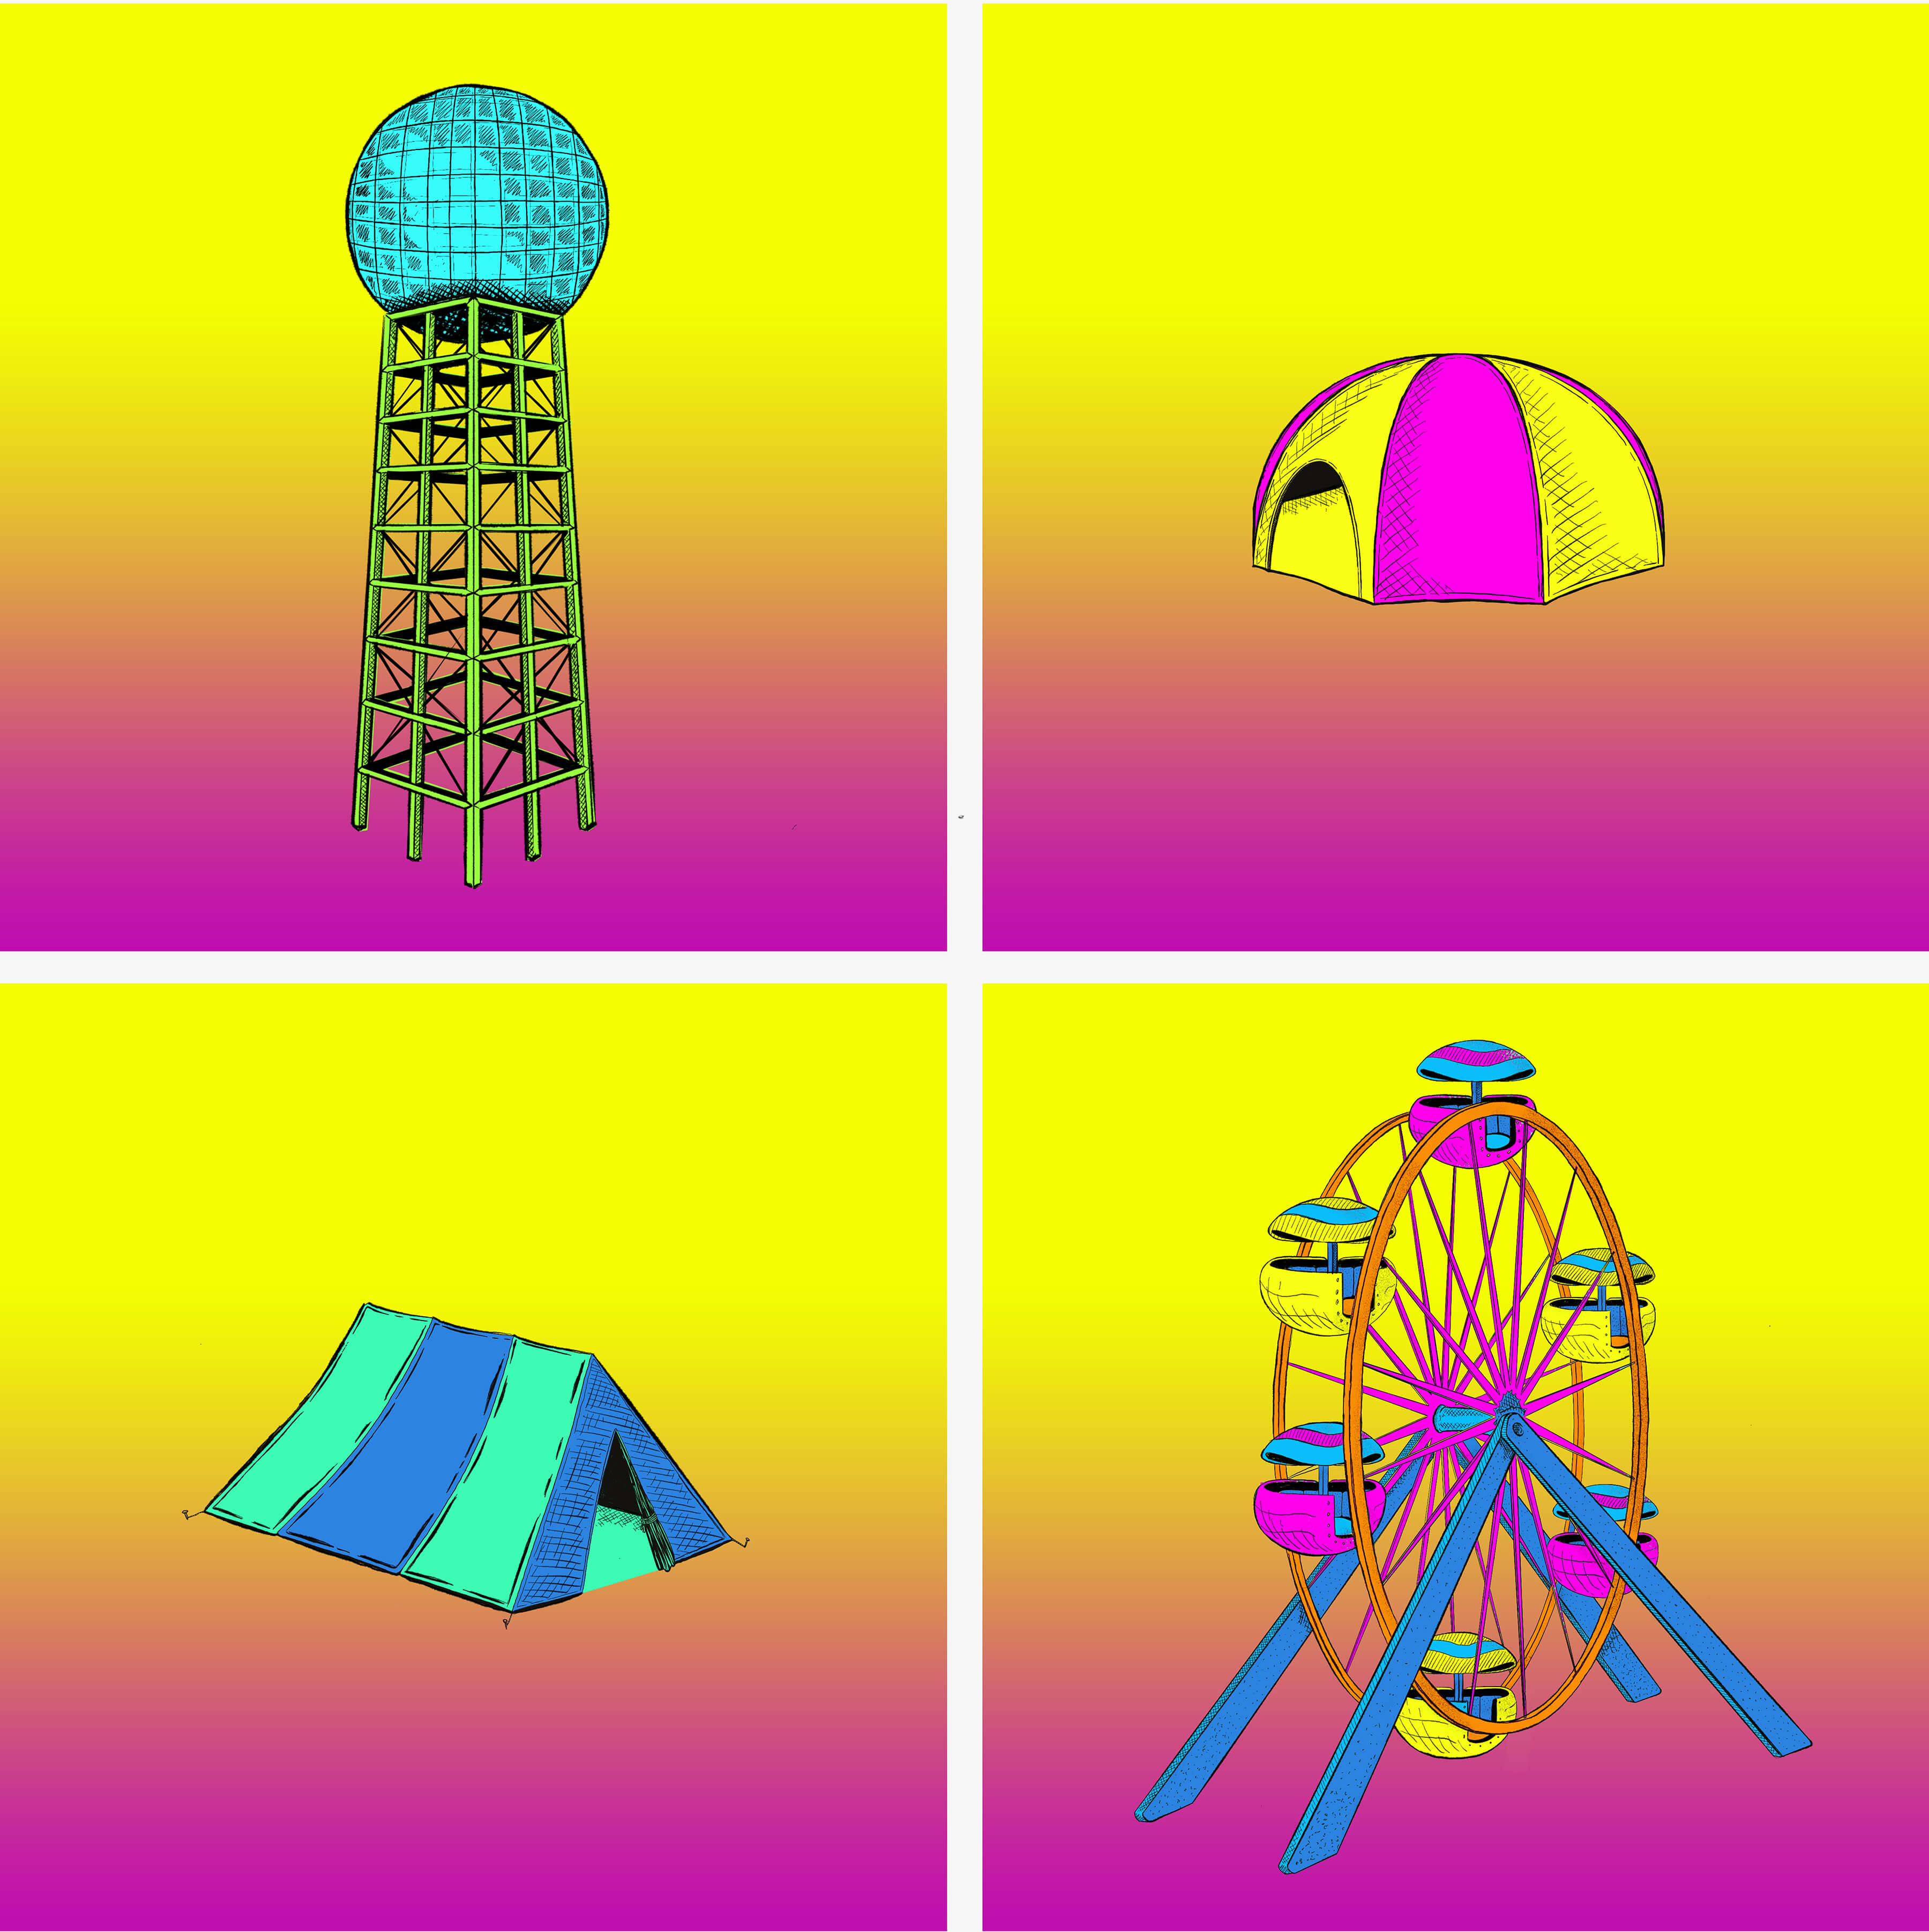 Initial art elements created for Bonnaroo pitch seperated into individual shots of the clocktower, the tents, and the ferris wheel.